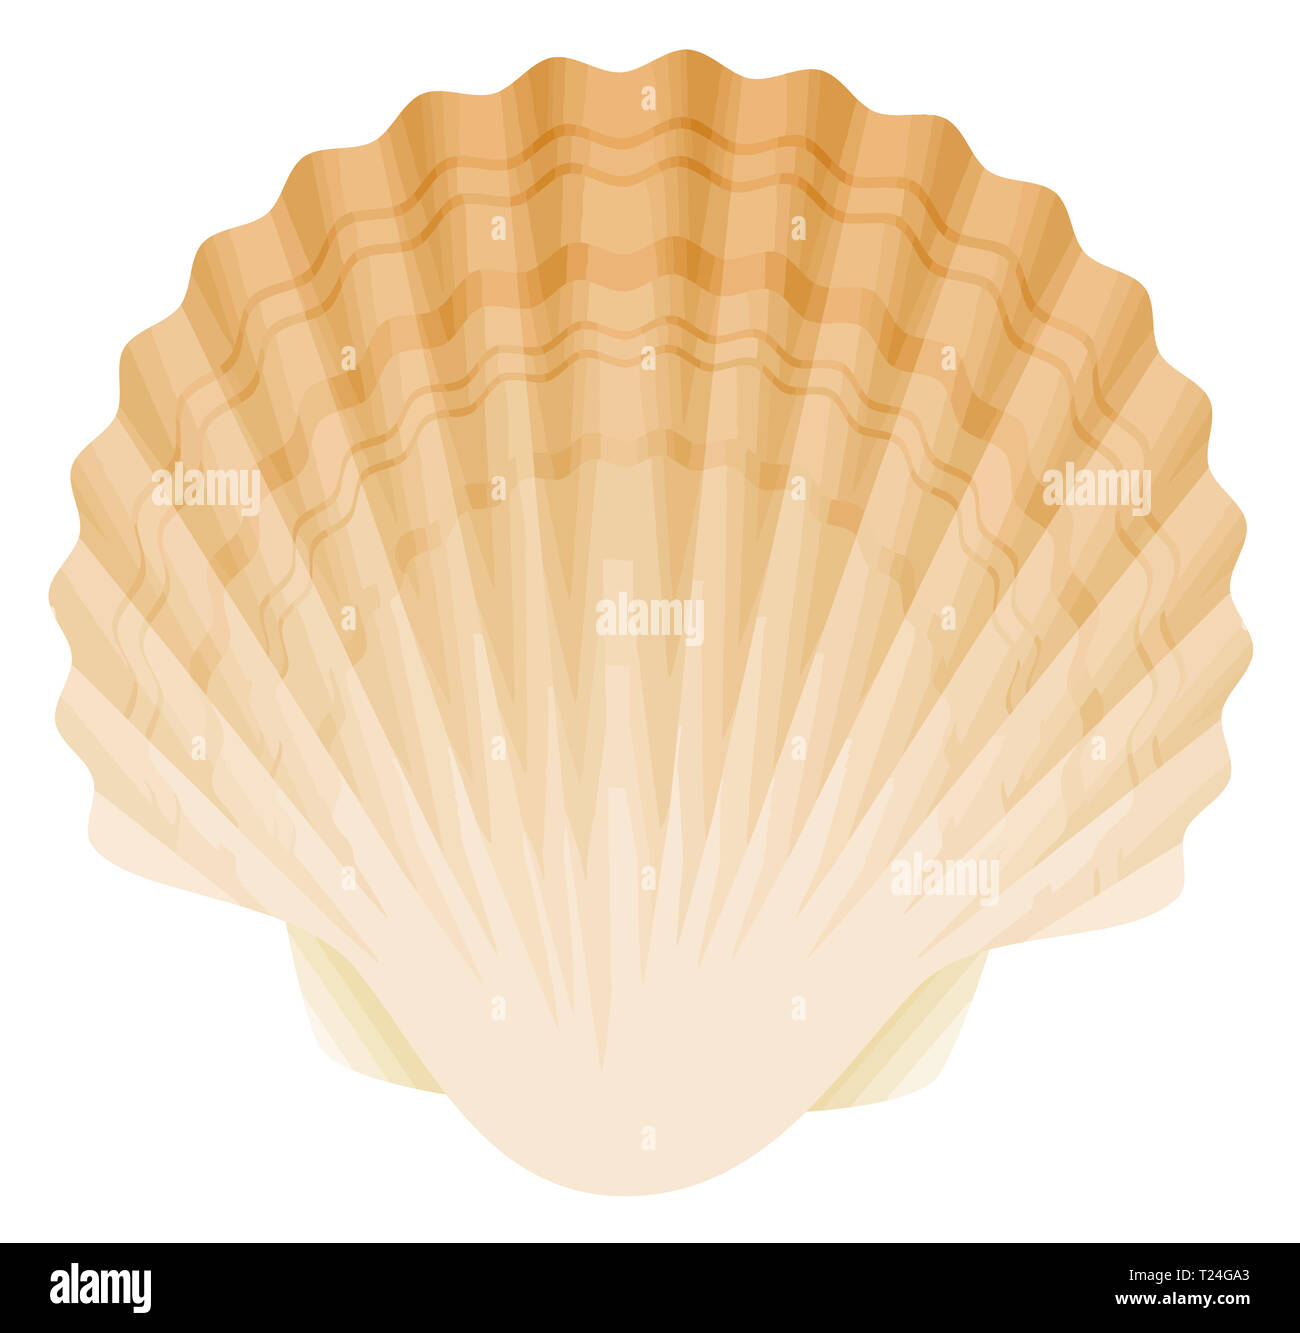 Clam shell Cut Out Stock Images & Pictures - Alamy